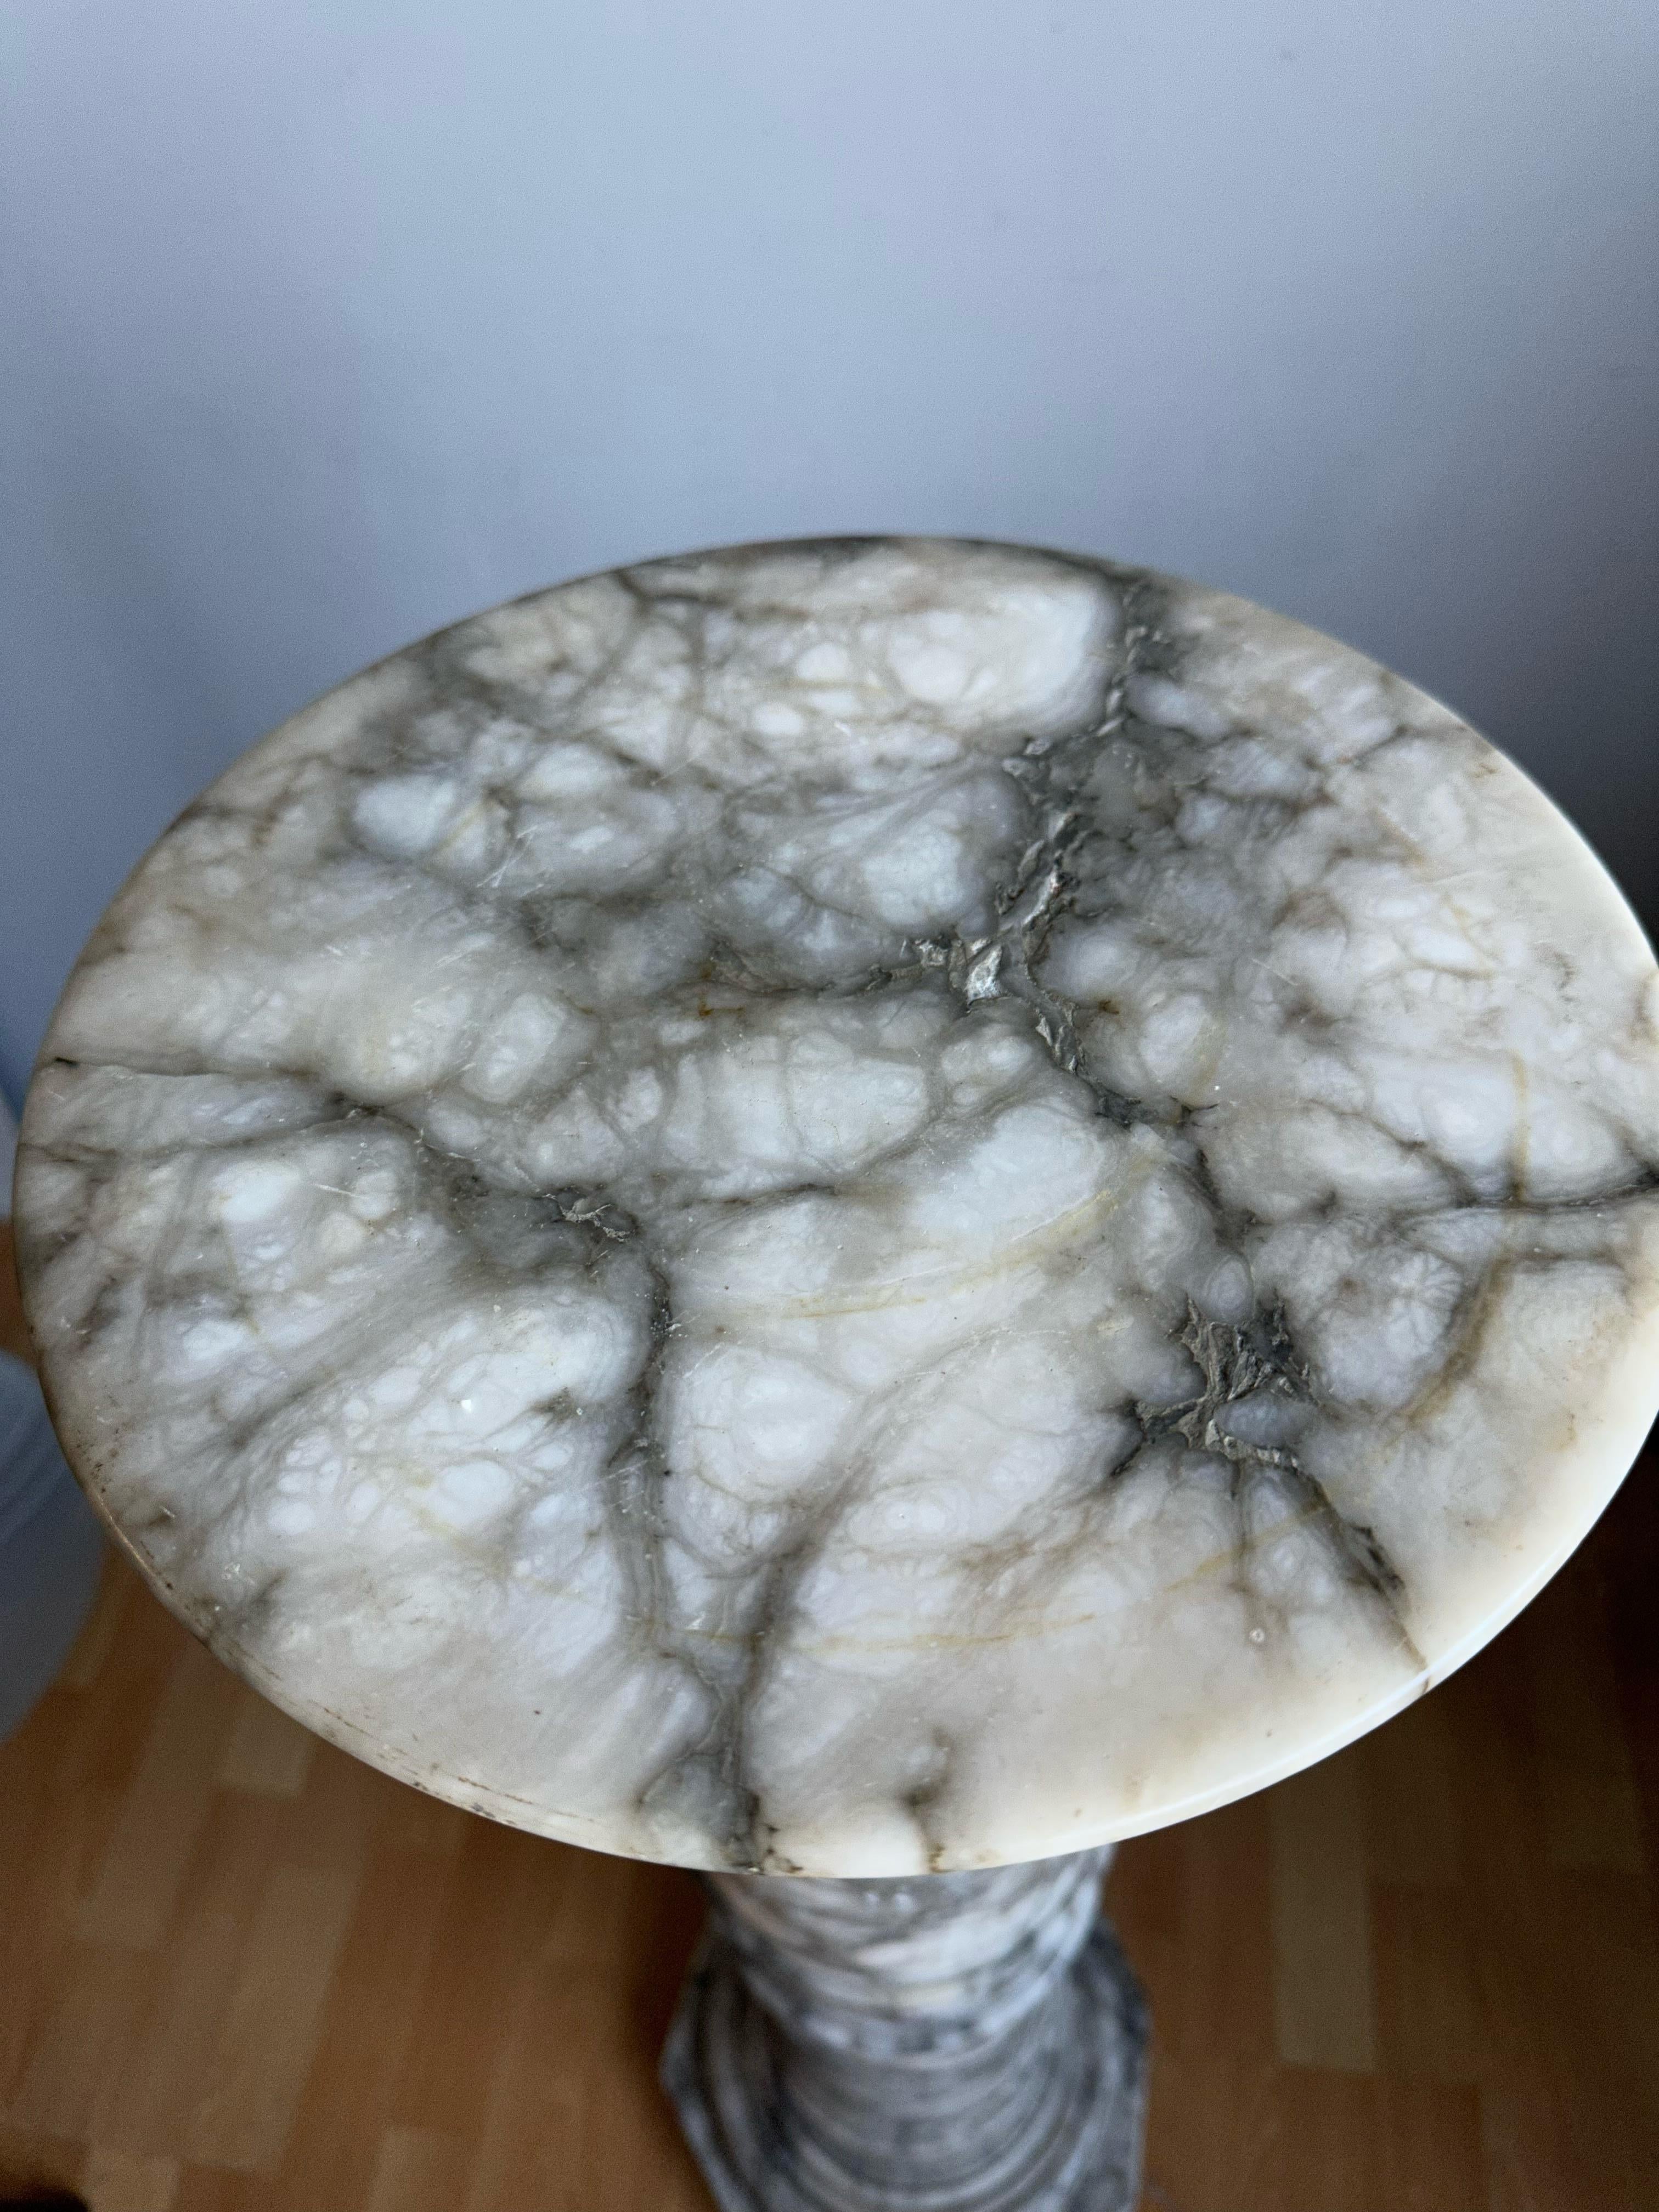 Wonderful Roman column for displaying a work of art.

This antique, beautiful and classical pedestal is perfect for showcasing an antique sculpture or bust. The slight wear, the shape and the wonderful, grey veins in the beige-white alabaster give